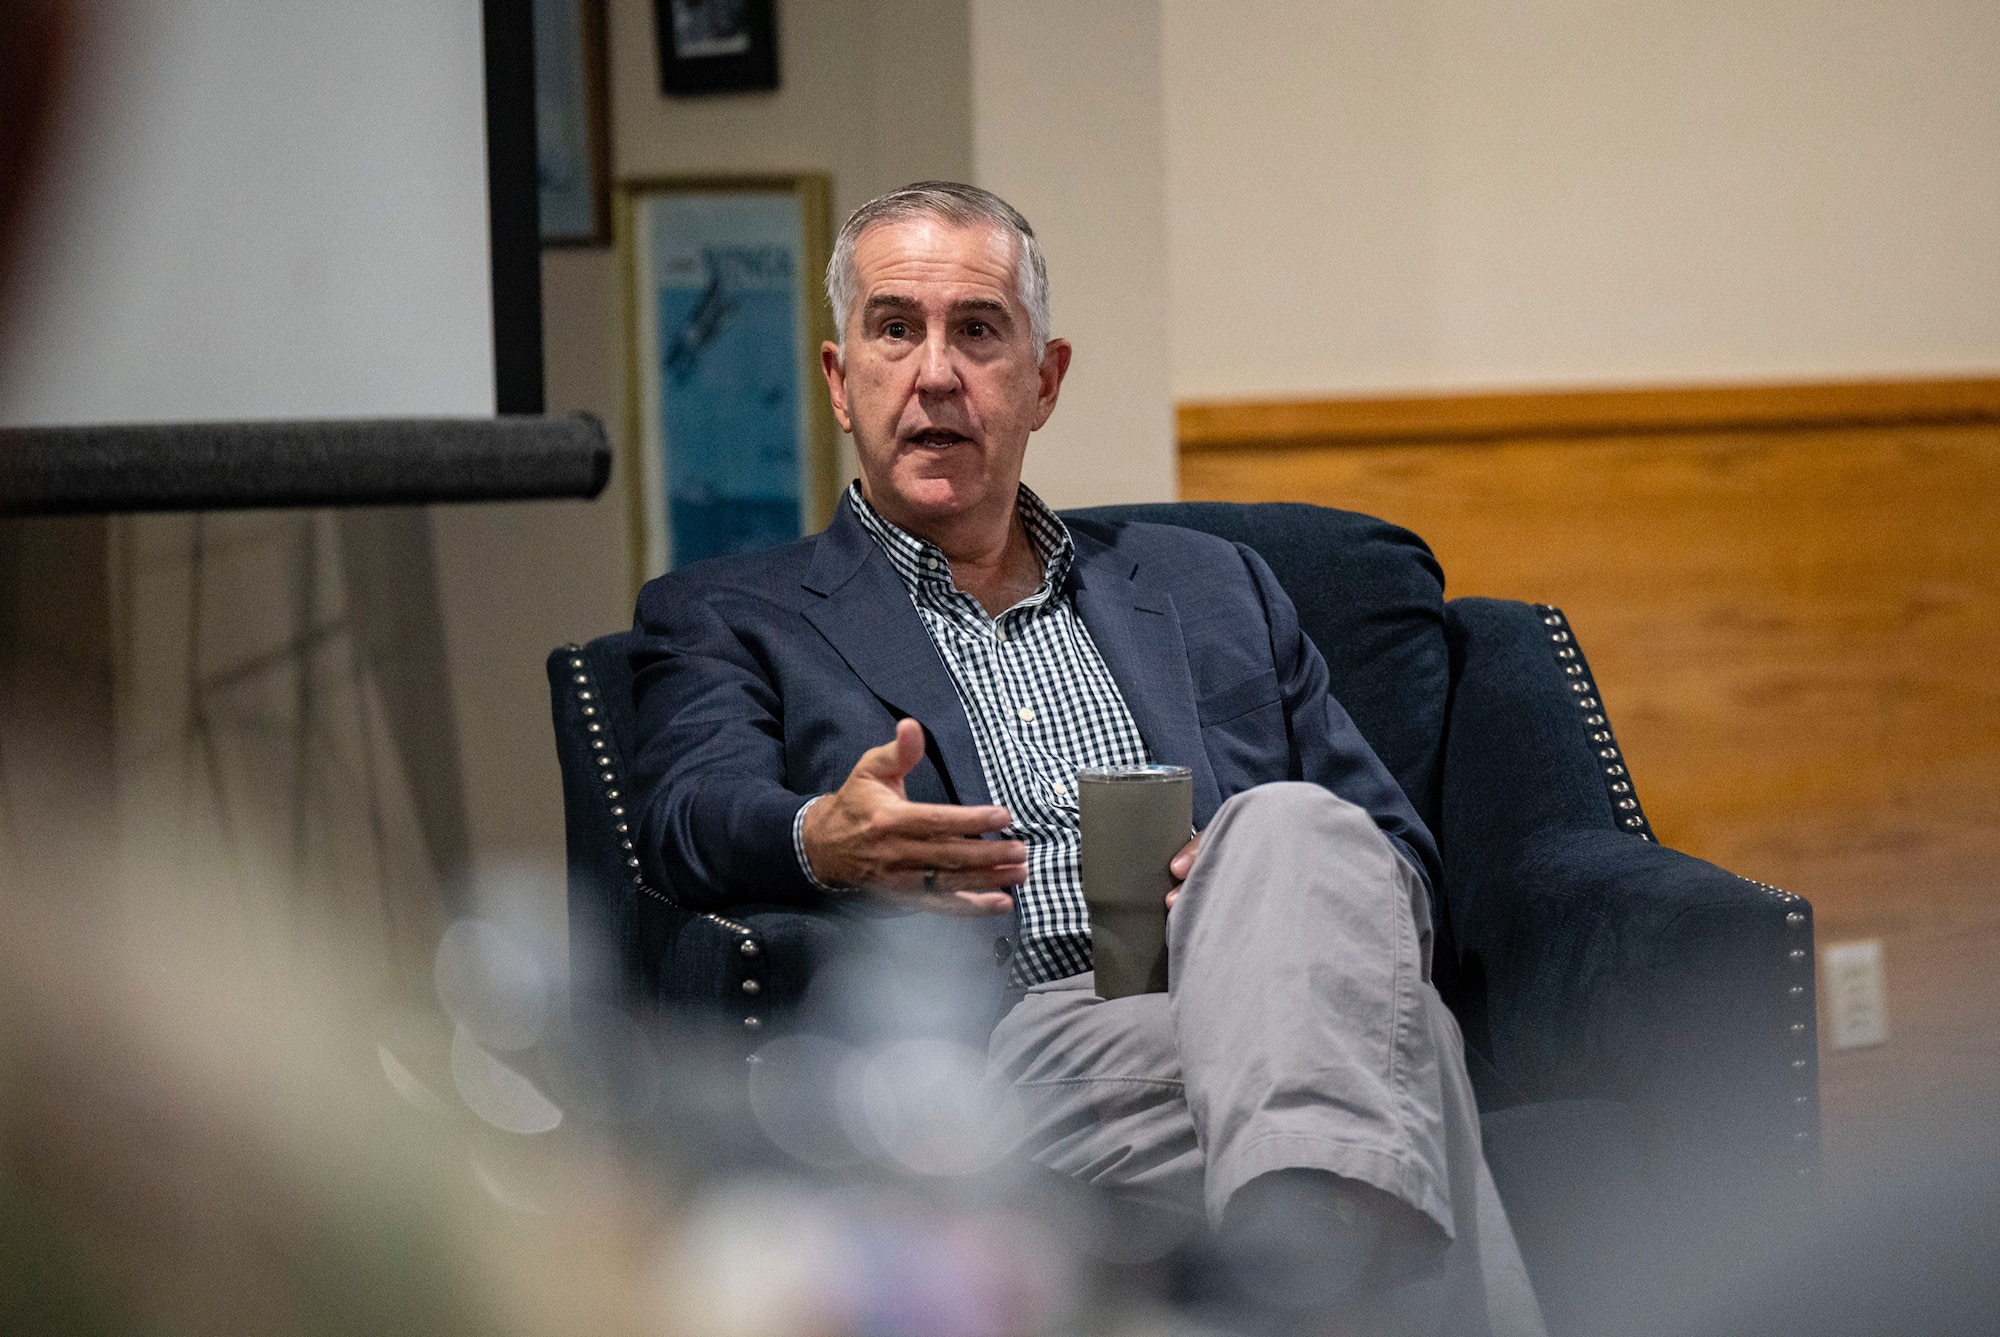 Retired Gen. John Hyten, former Vice Chairman of the Joint Chiefs of Staff, takes part in a discussion with Space Training and Readiness Command senior leaders and spouses during a conference